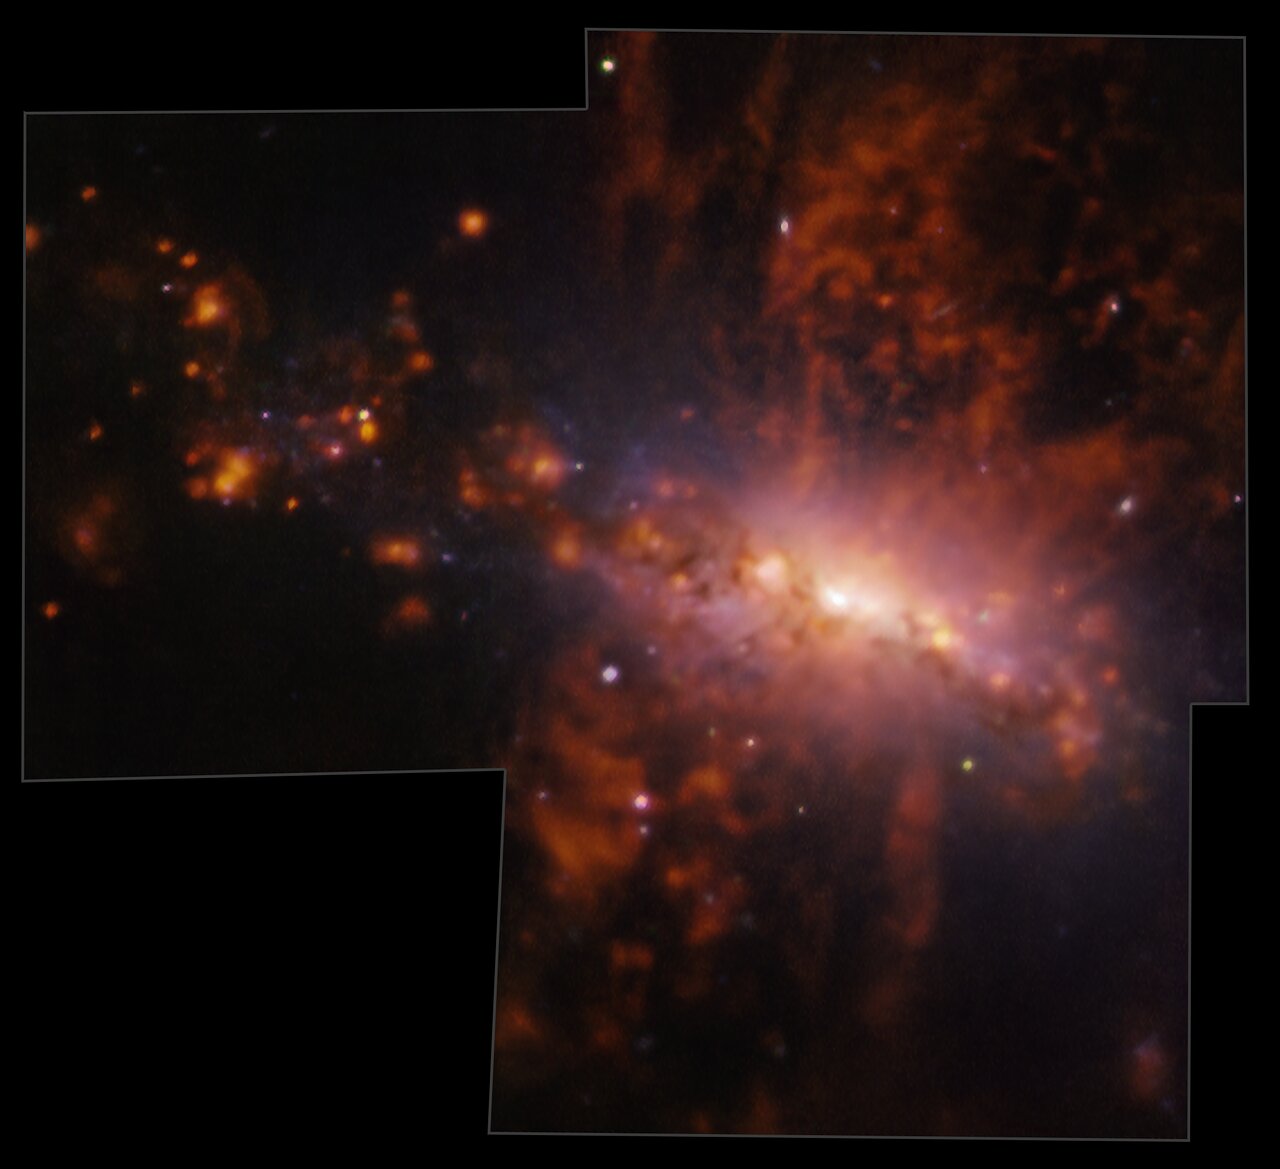 A splotchy and blurry view of a galaxy with a bright central region.